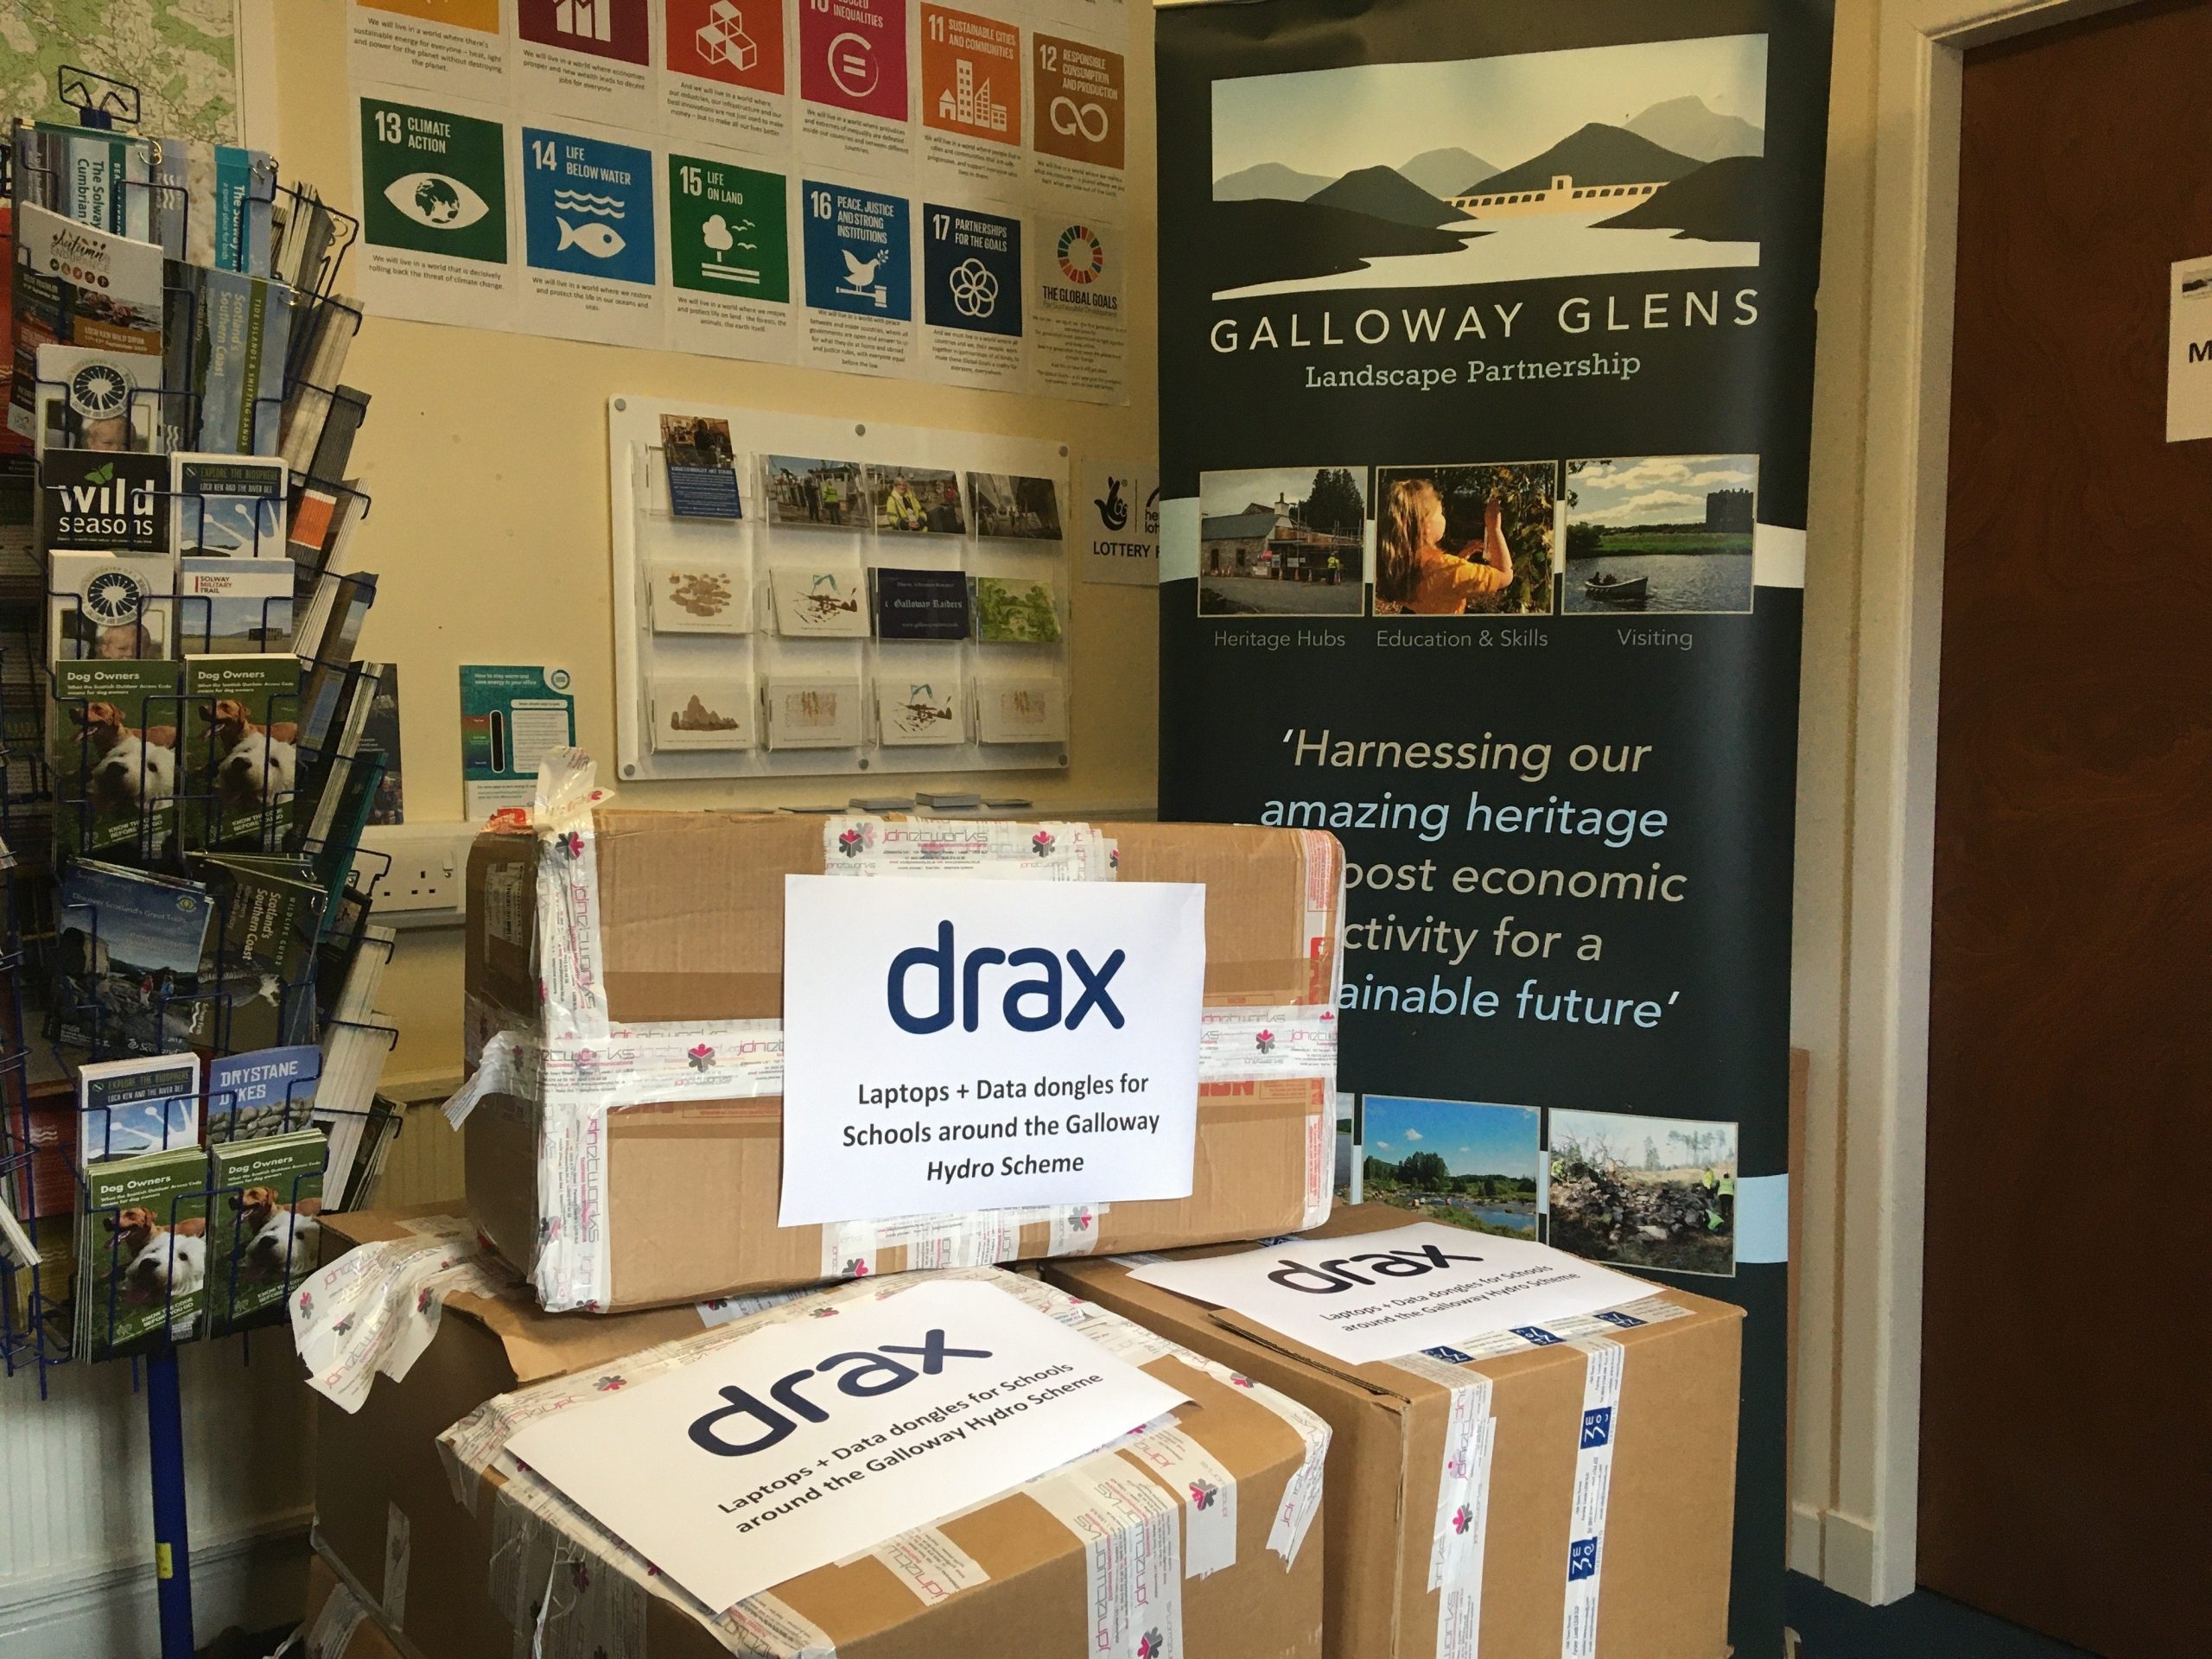 Drax laptops and dongles arrive in Dumfries and Galloway.